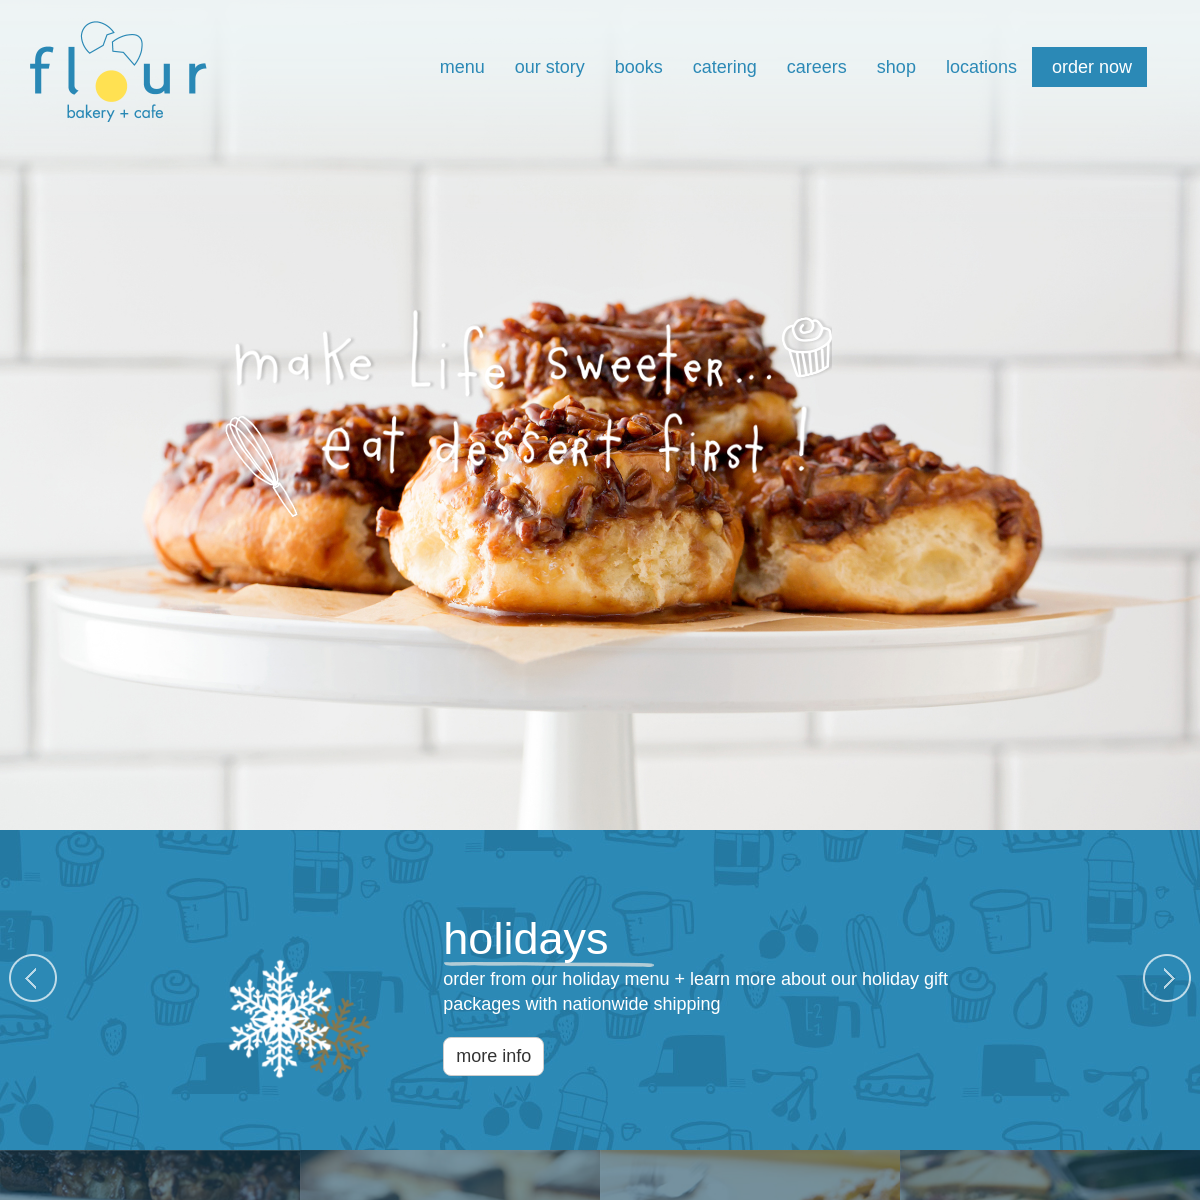 A complete backup of flourbakery.com